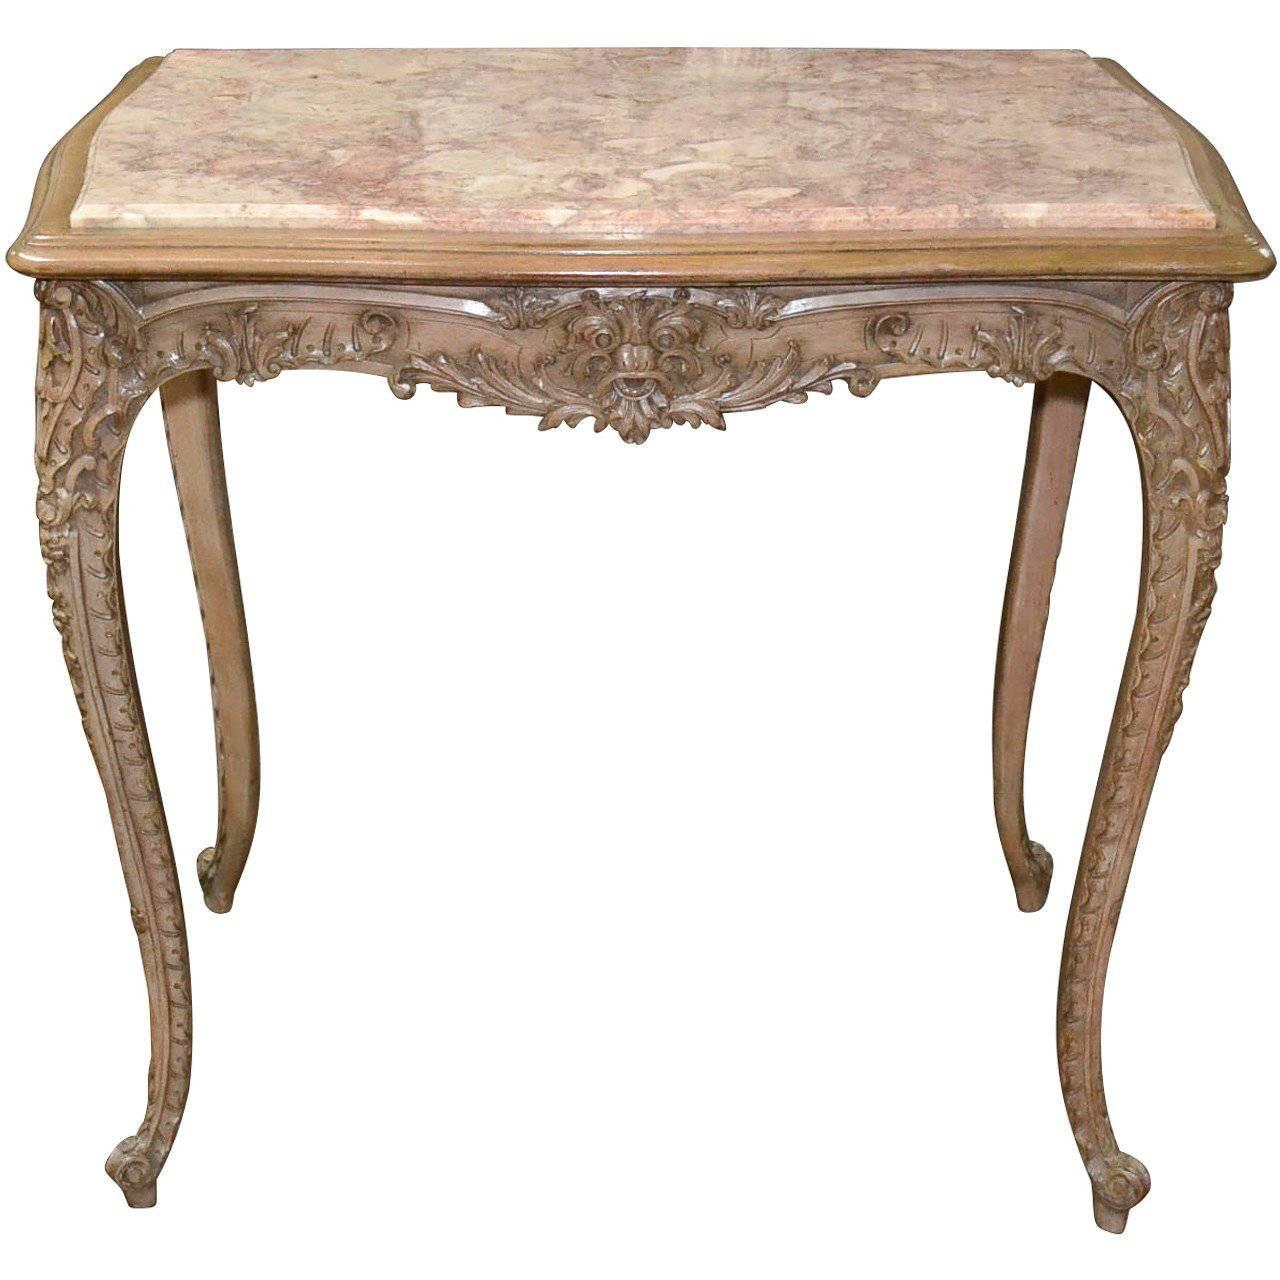 19th Century French Carved and Lacquered Salon Table For Sale